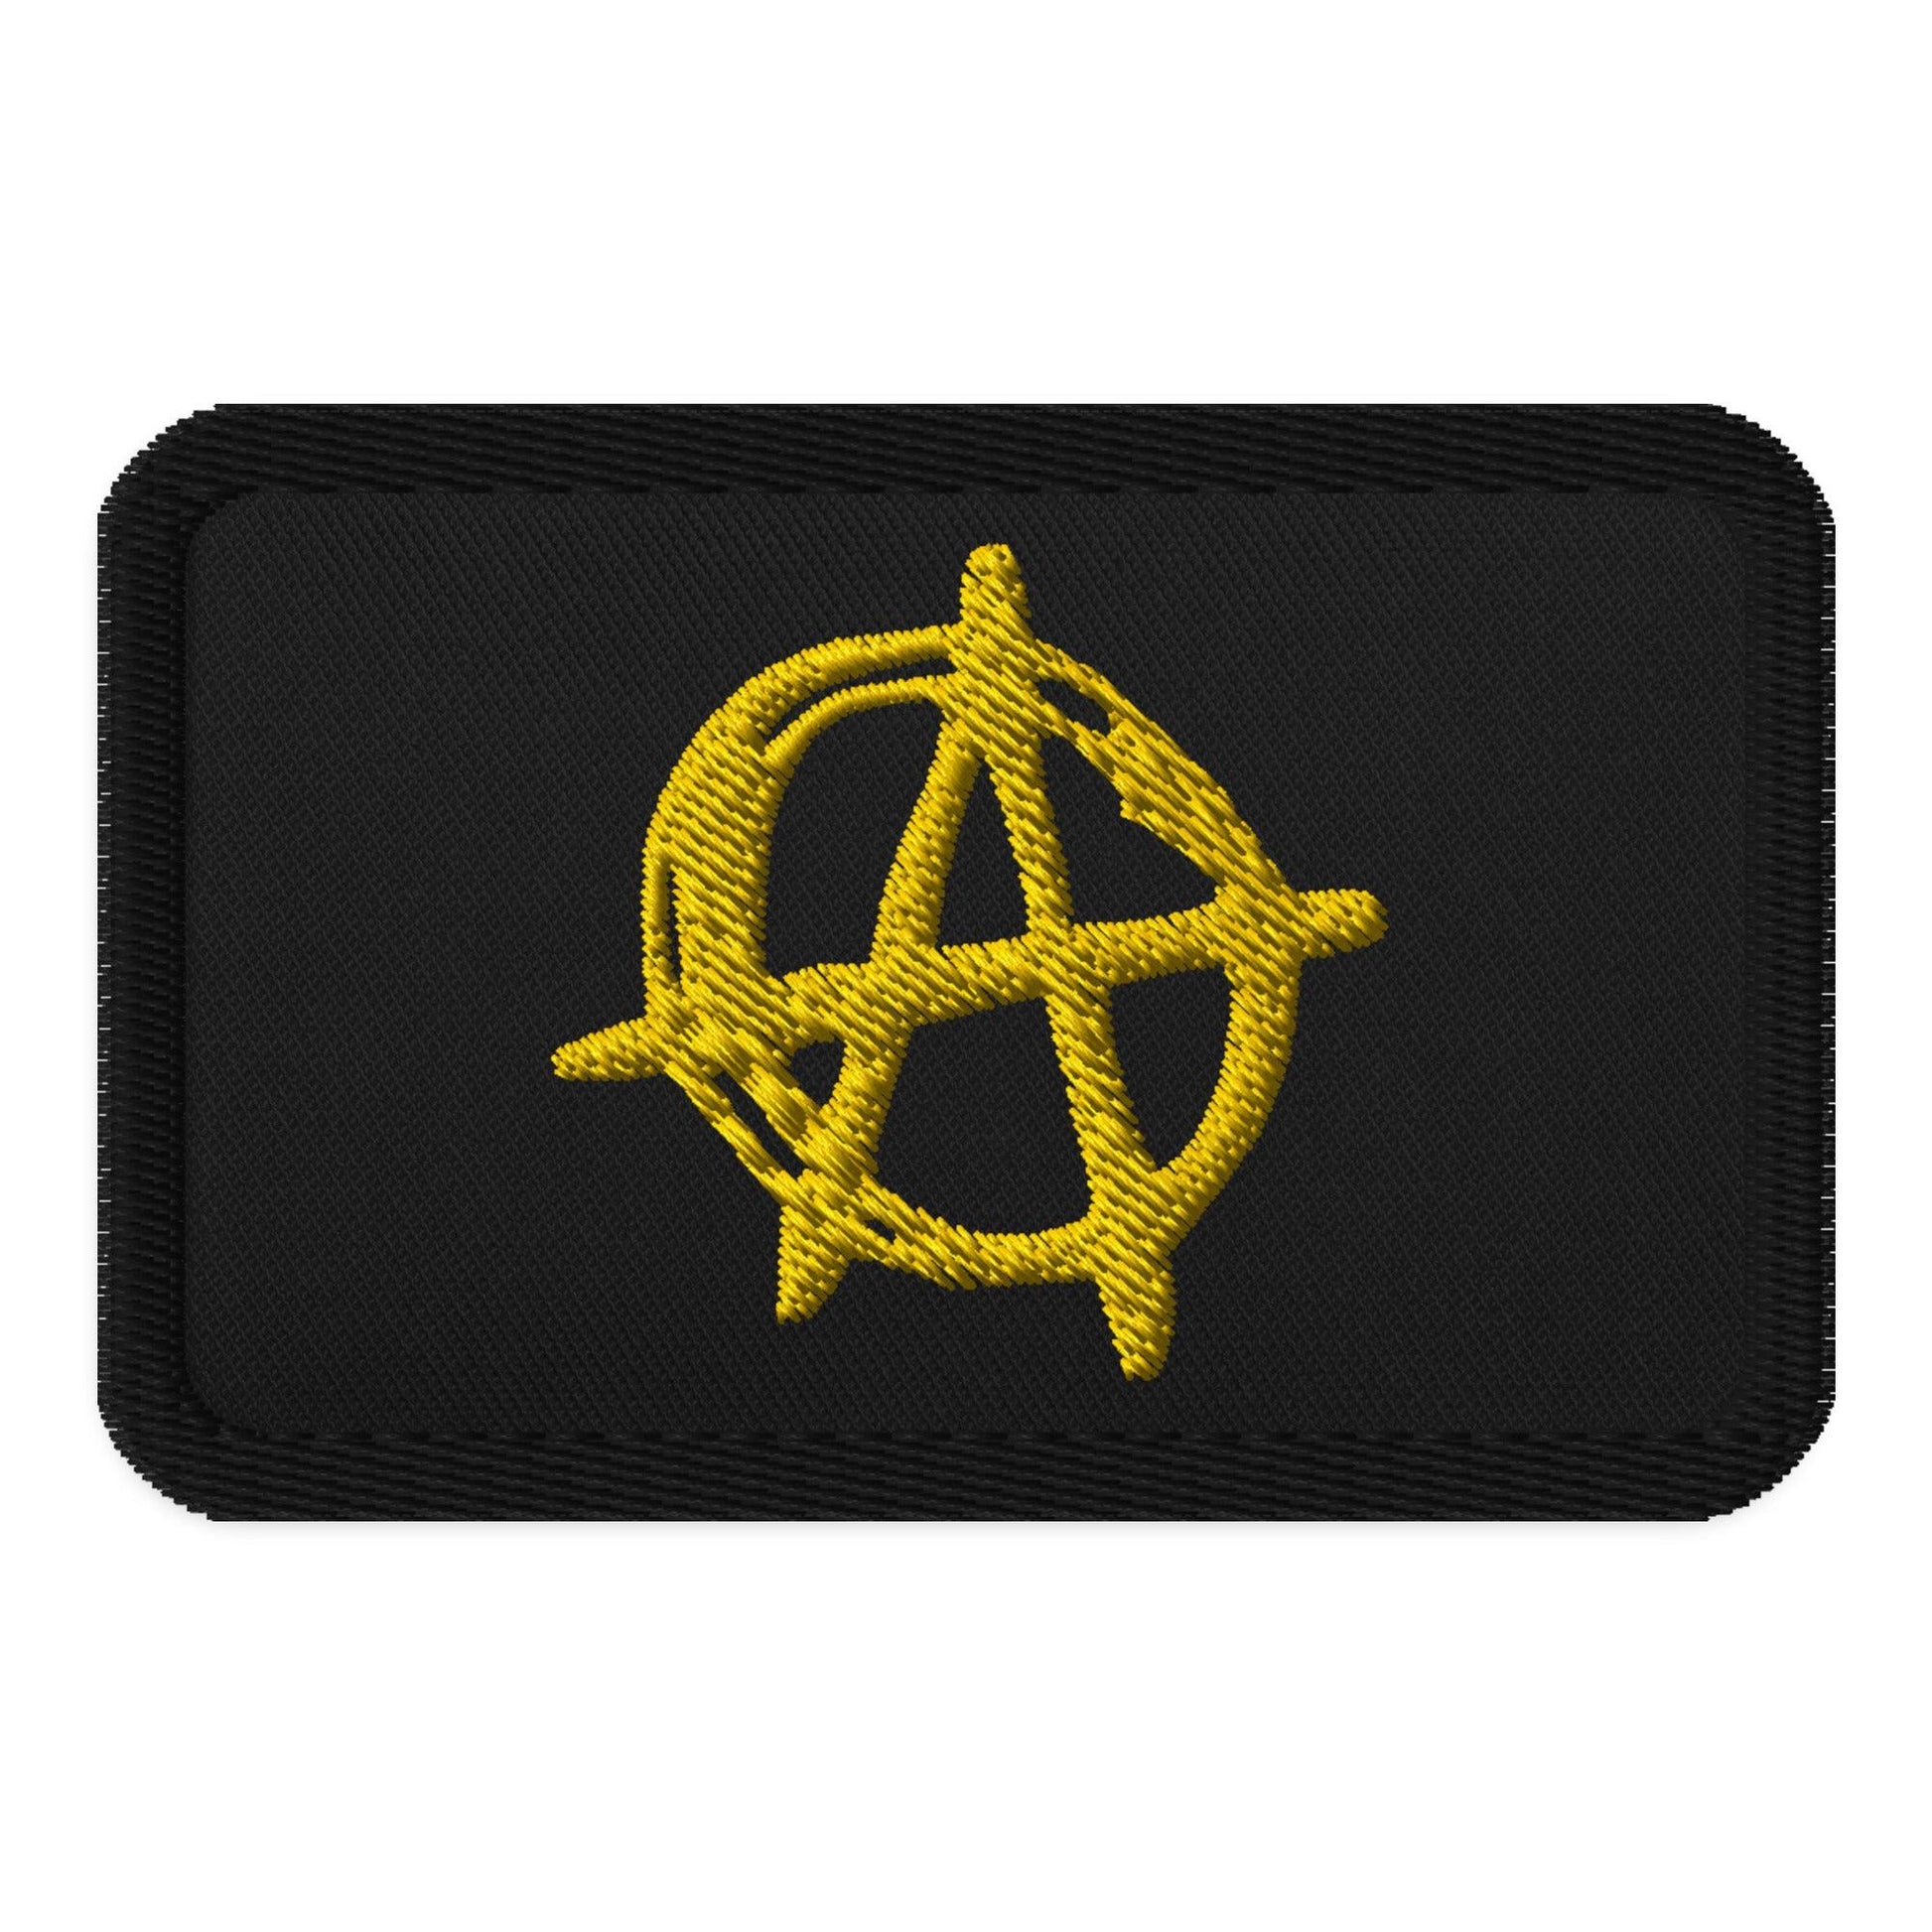 Embroidered Anarchy patches - AnarchyWear